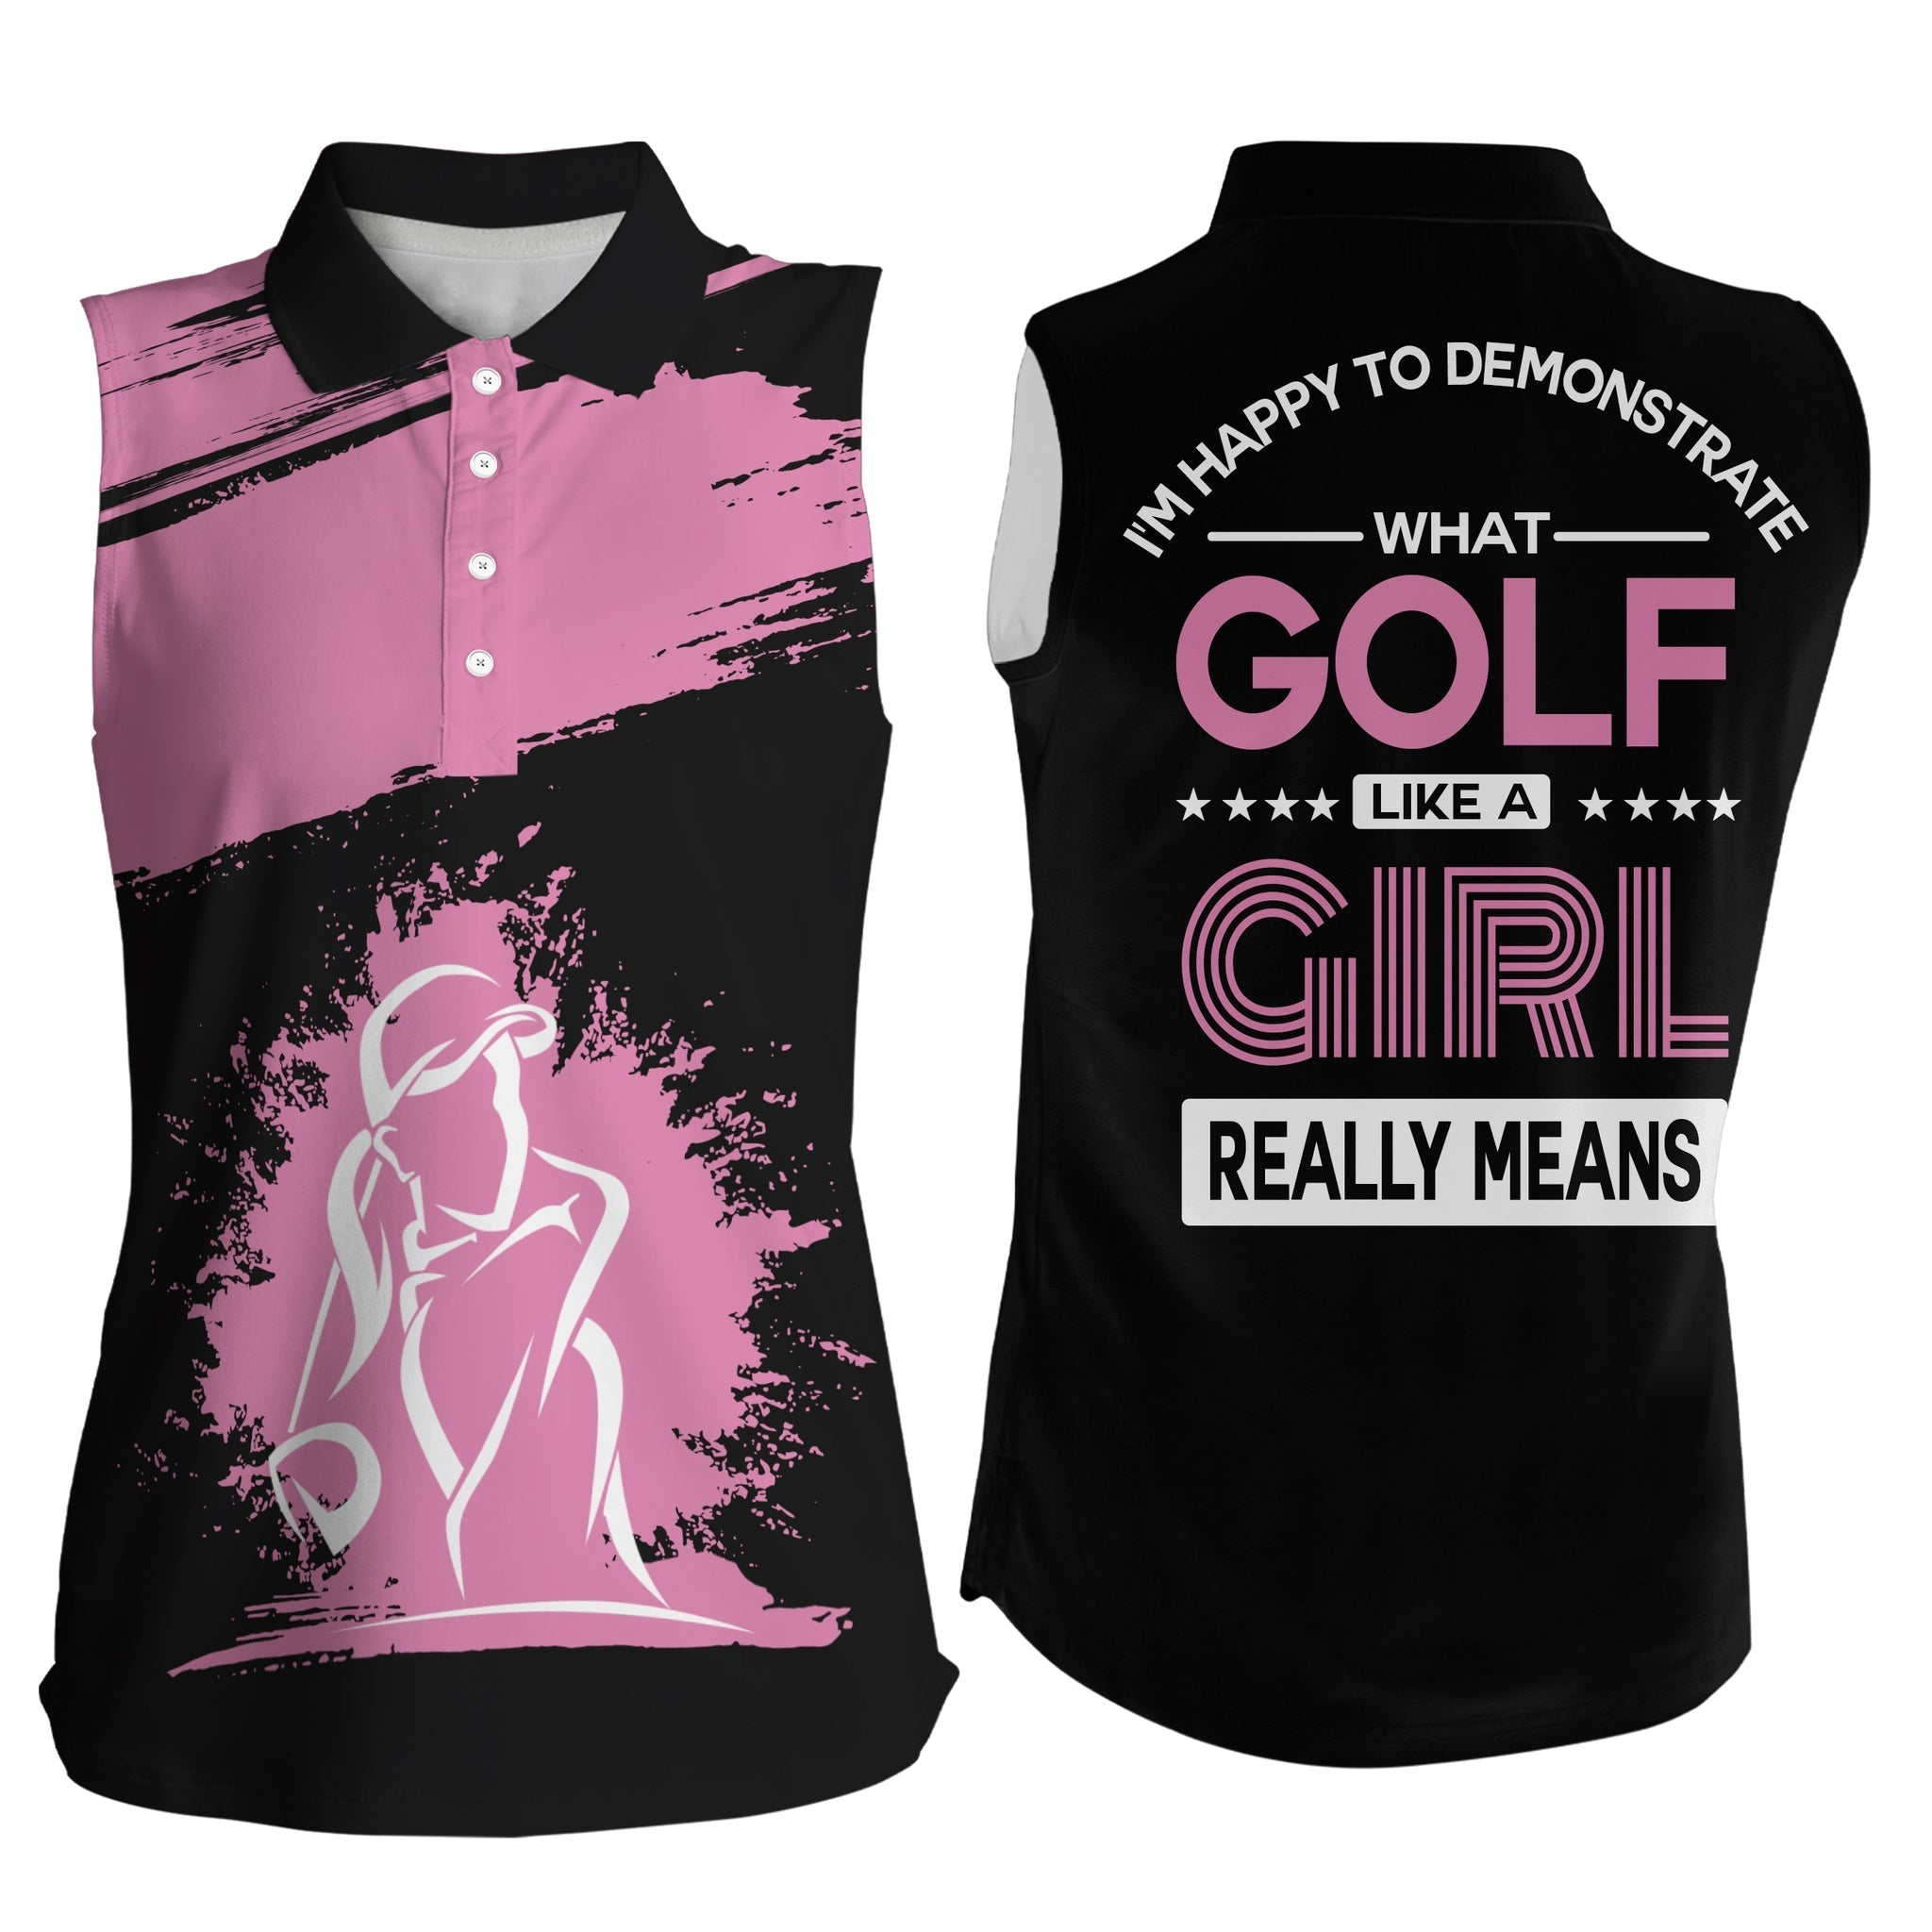 Funny black pink Women sleeveless polo shirt/ I''m happy to demonstrate golf like a girl really means